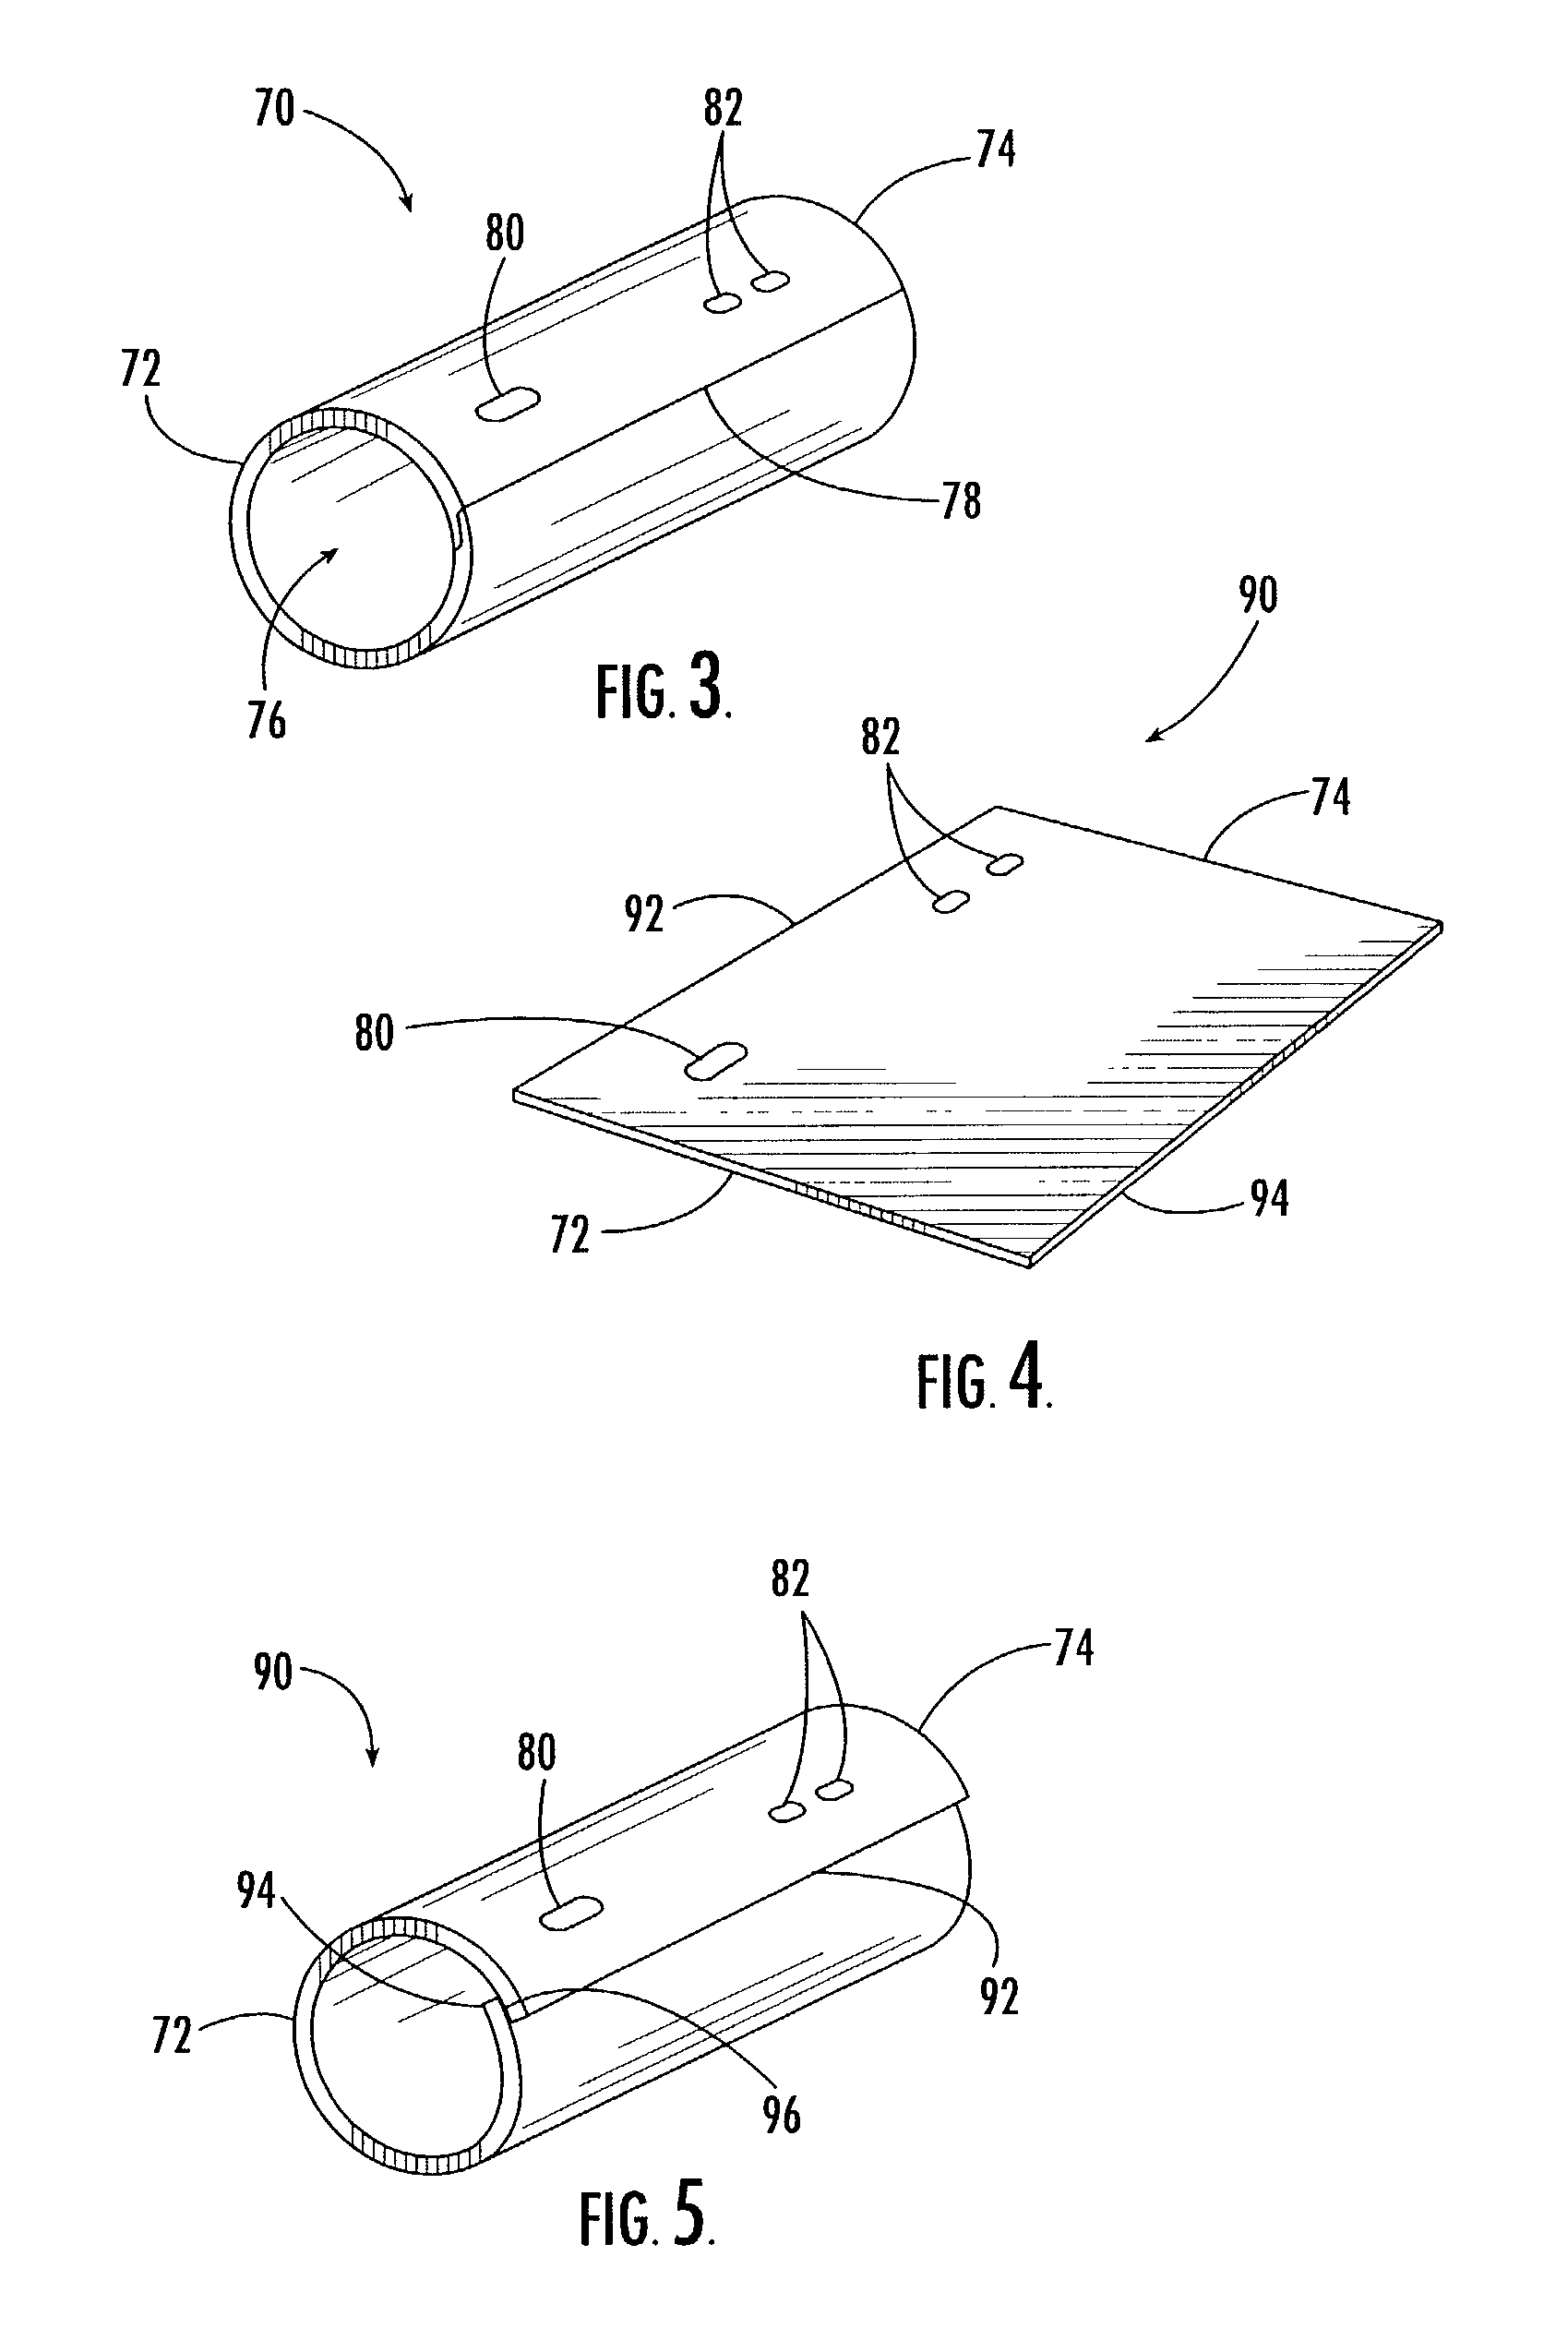 Consolidation joining of thermoplastic laminate ducts